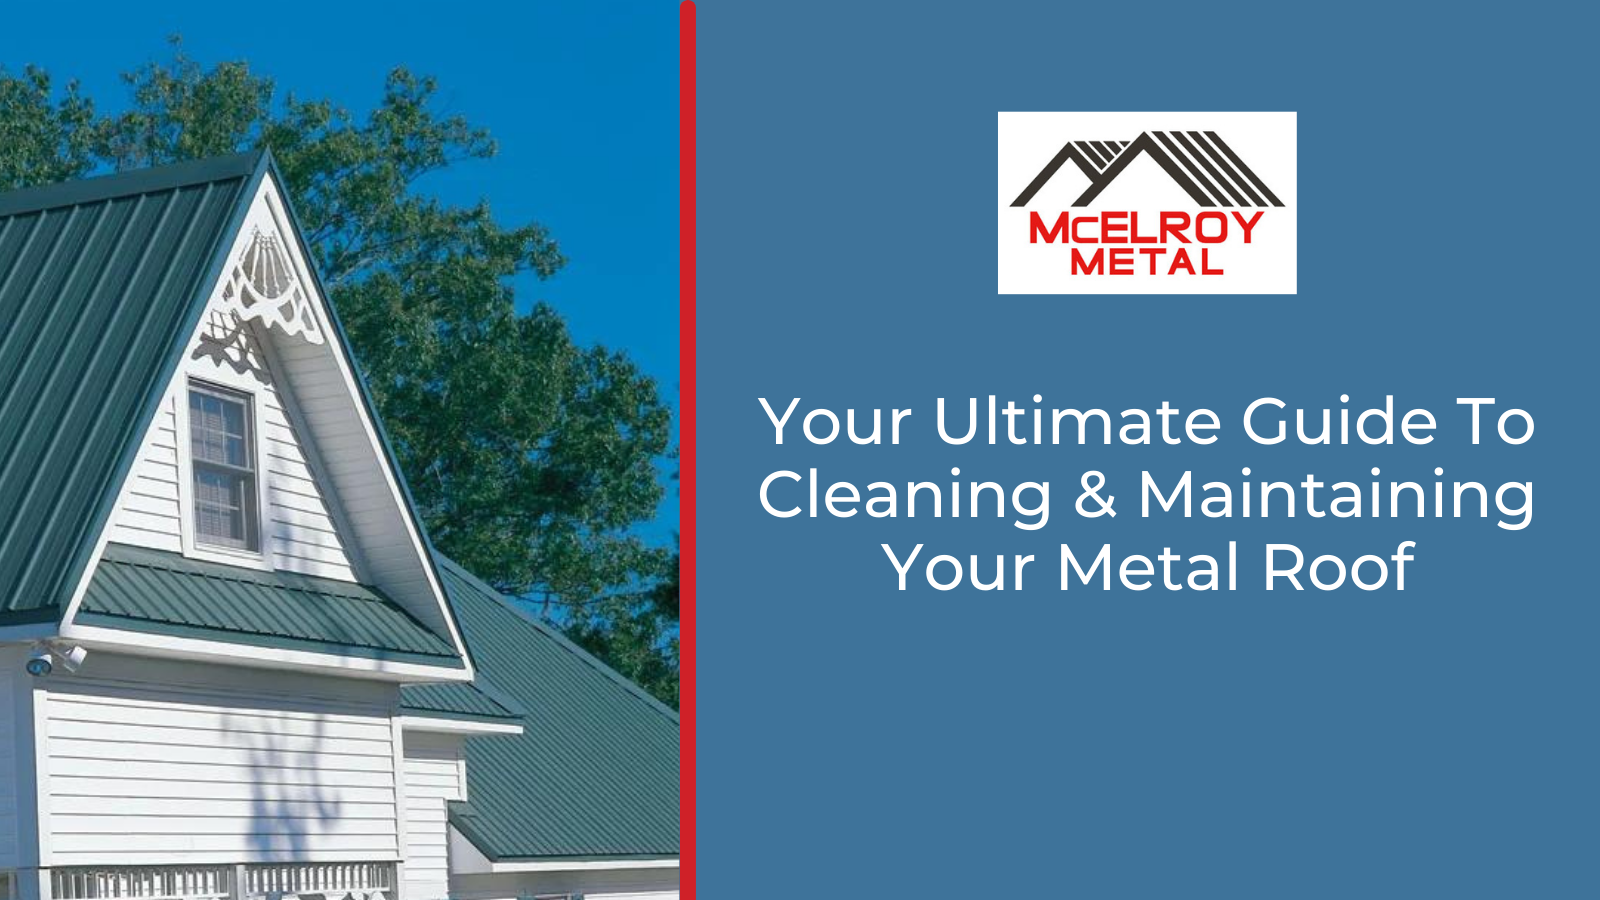 Your Ultimate Guide To Cleaning & Maintaining Your Metal Roof